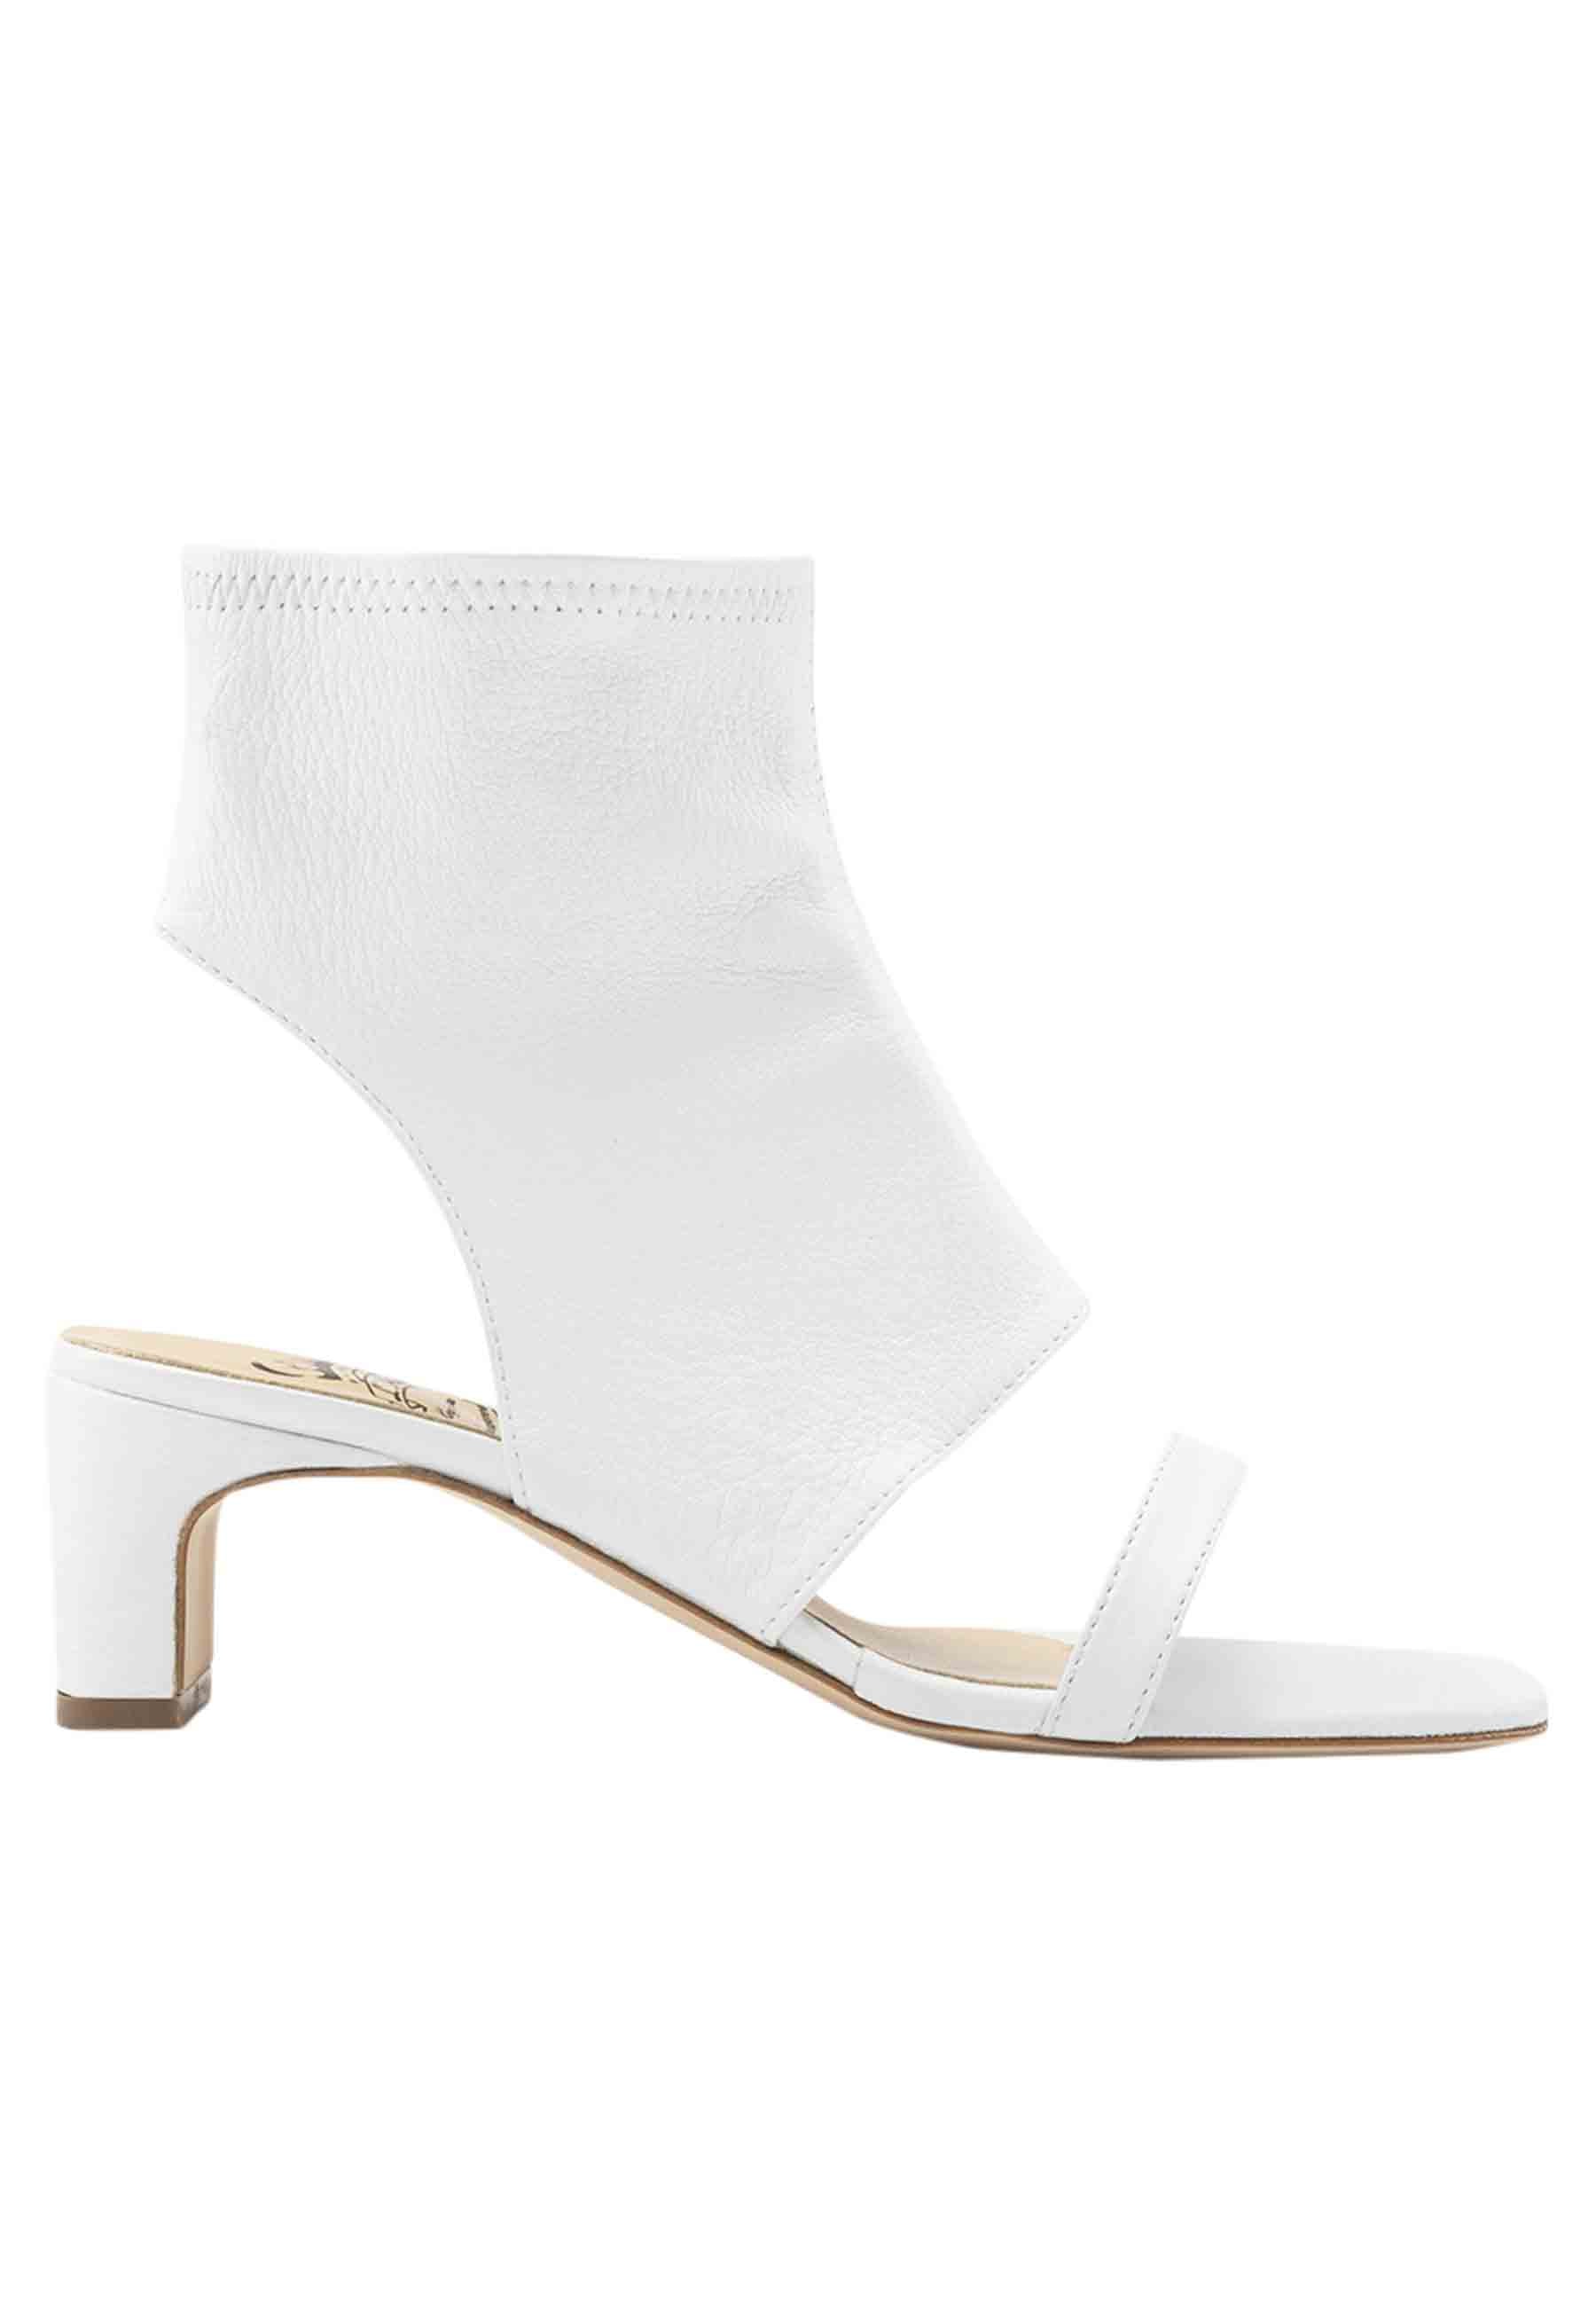 Women's sandals in white stretch leather with medium heel and anklet